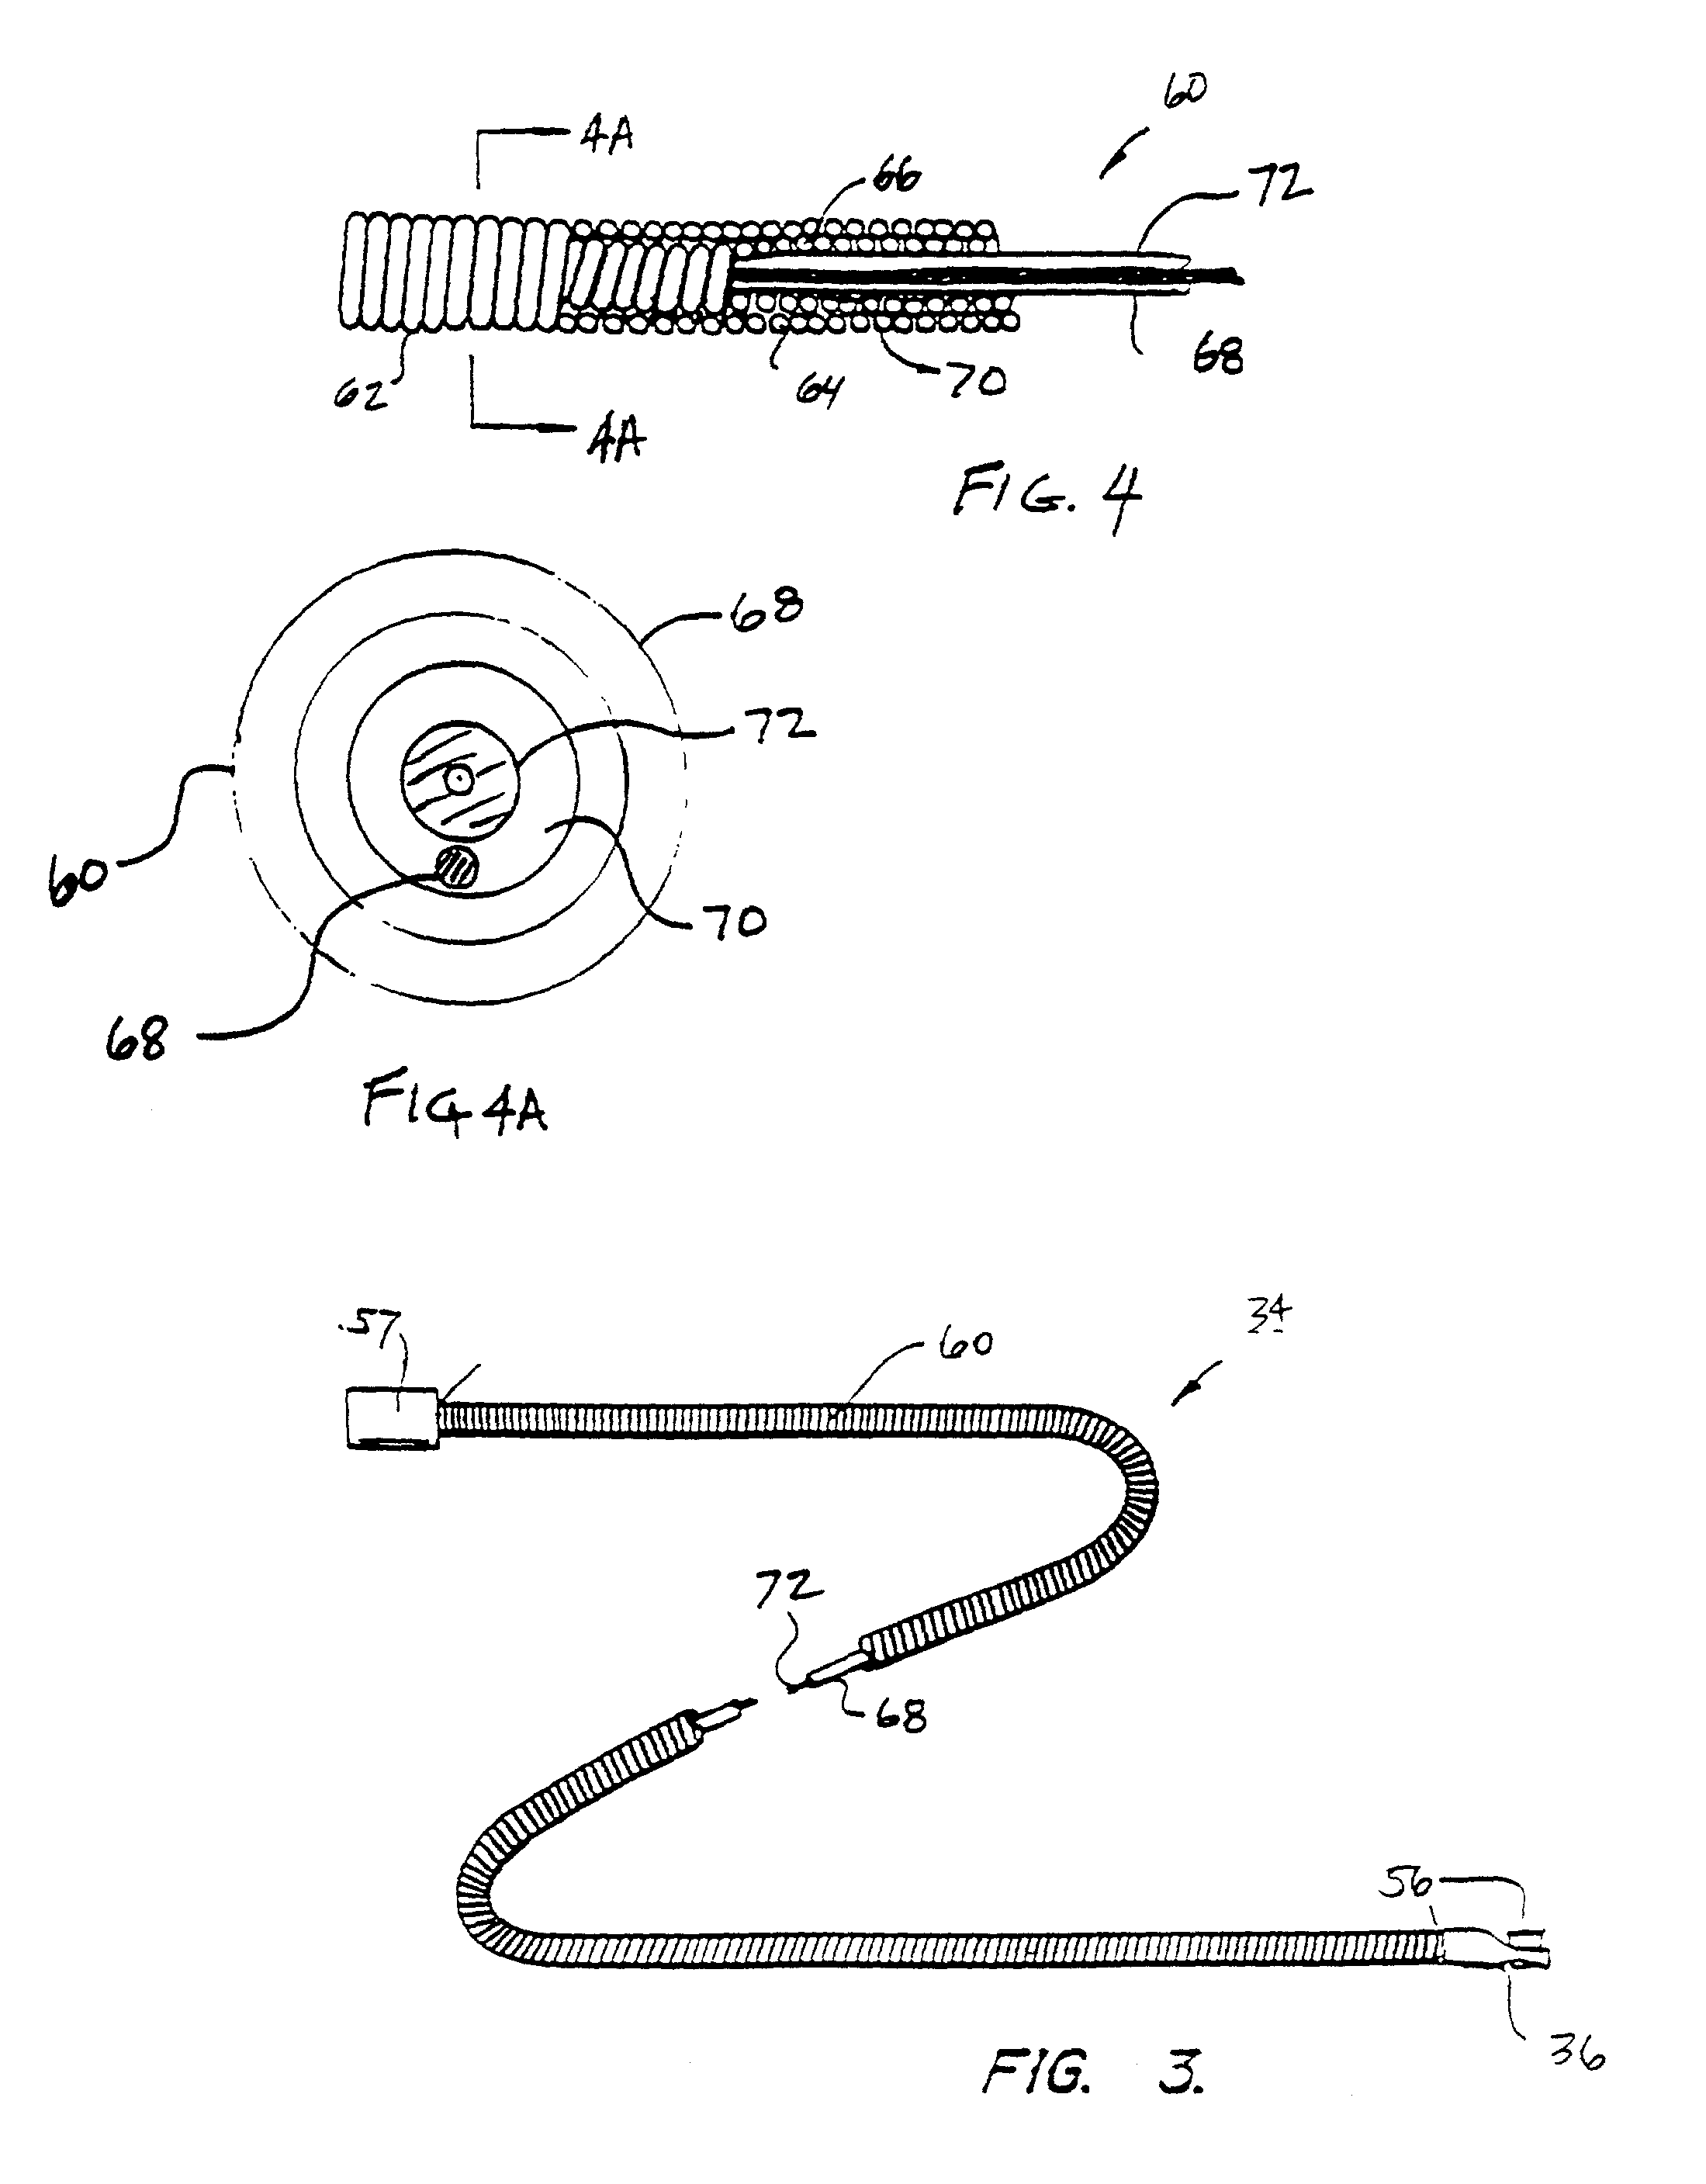 System and method for intraluminal imaging